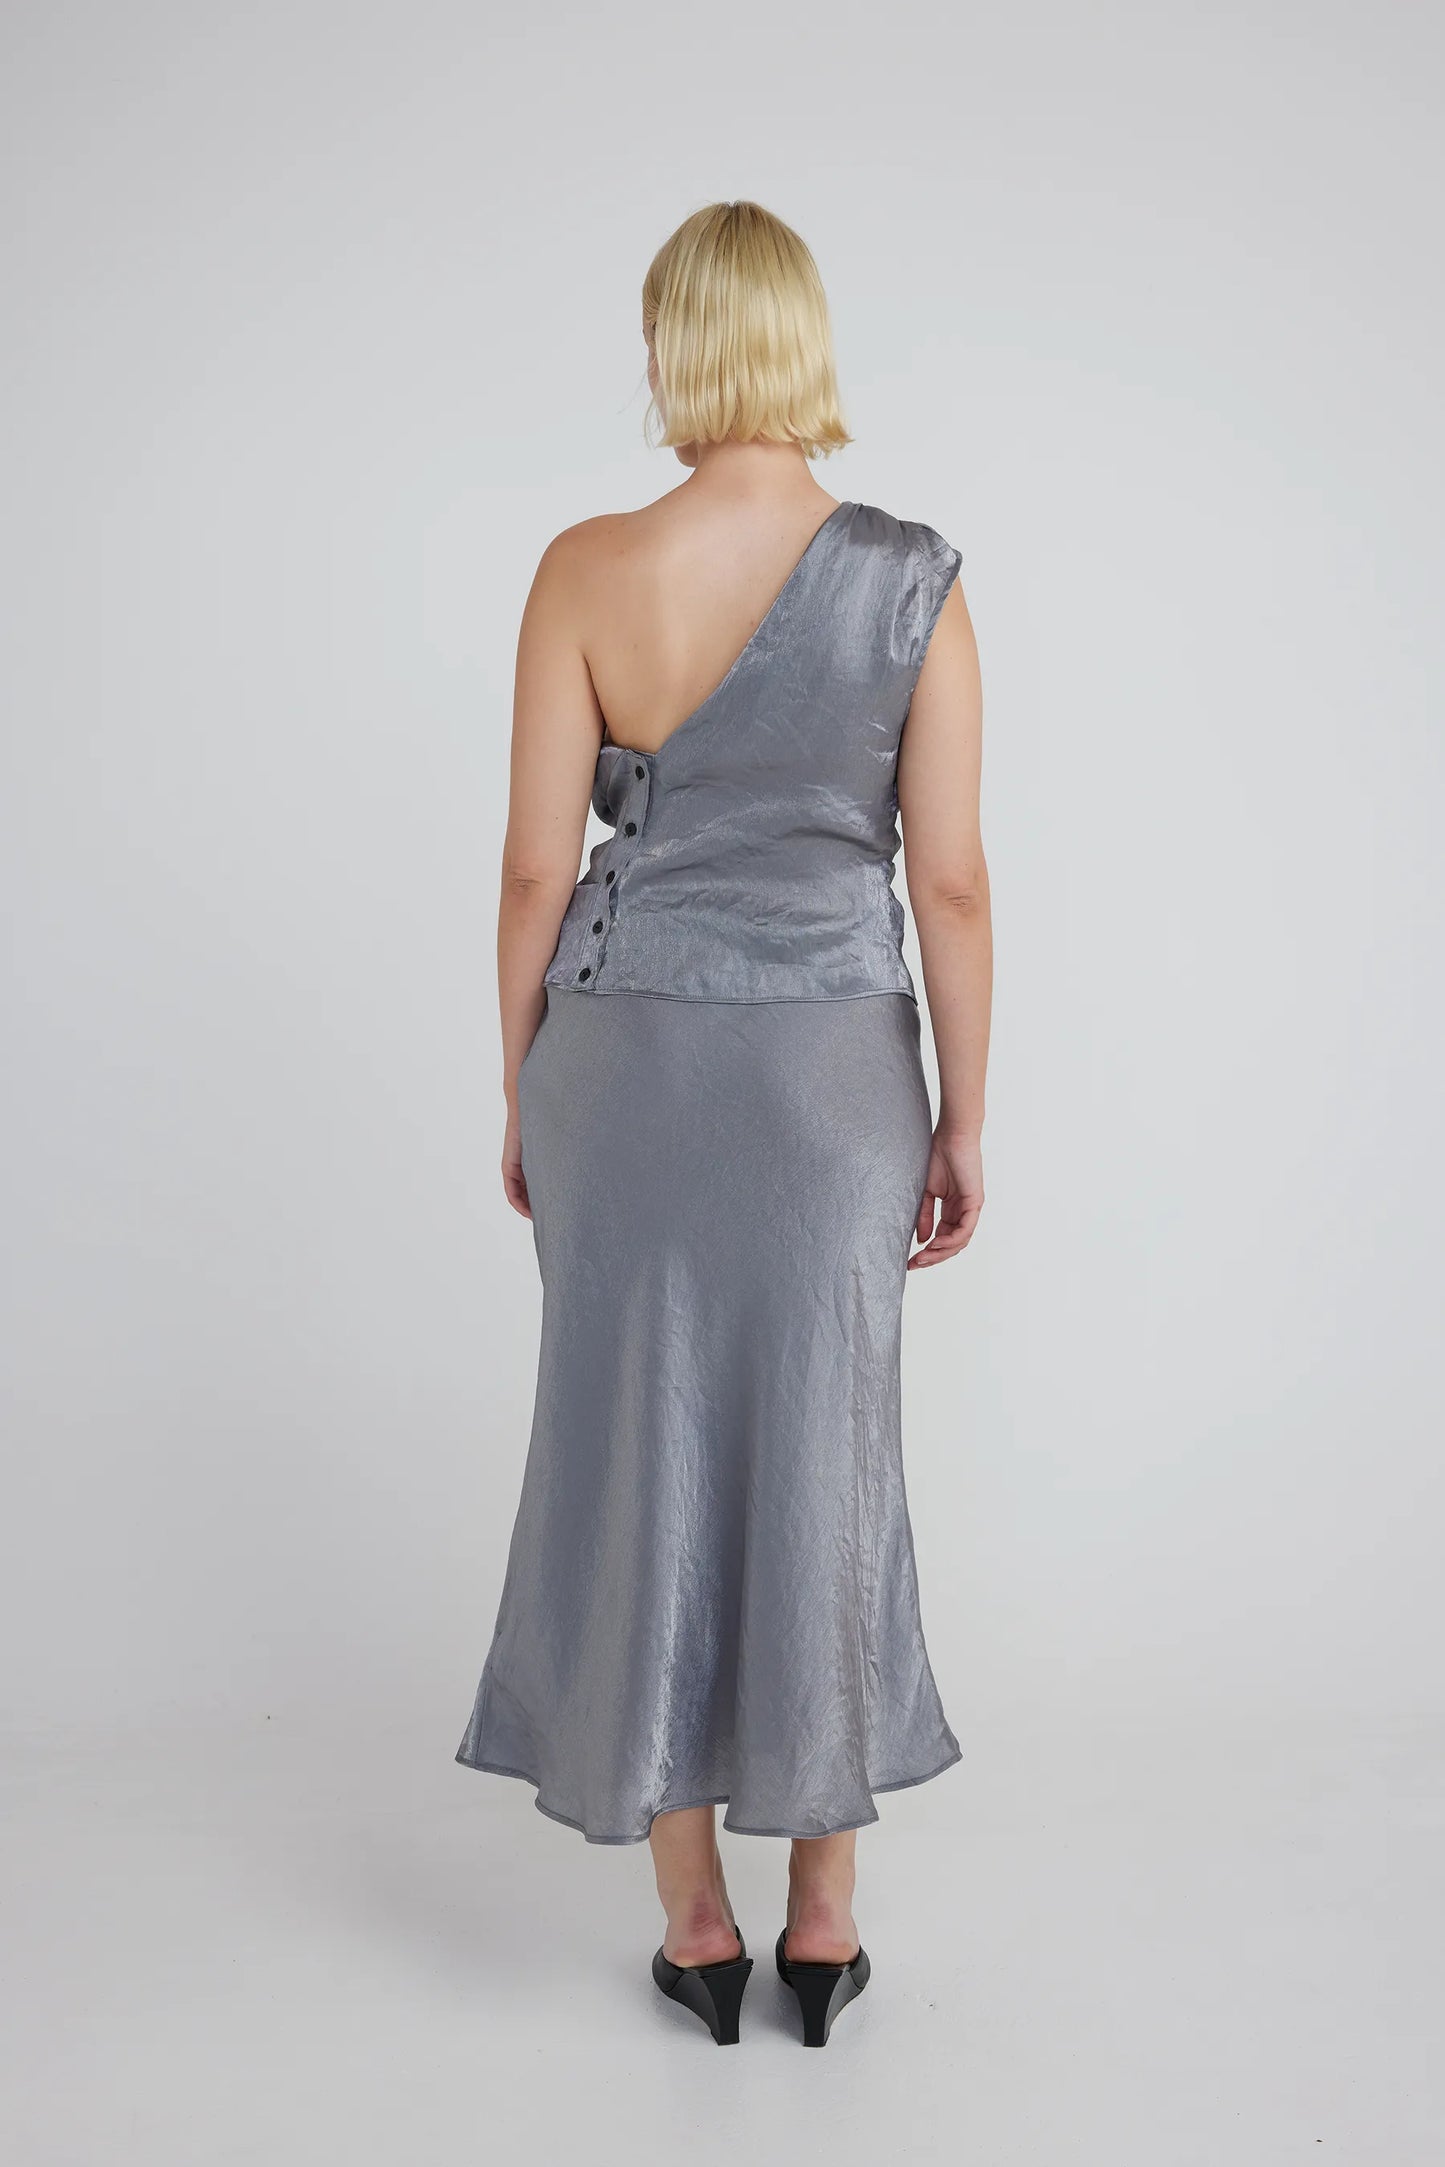 UMA Store Muse the label Ora Top  Silver grey metallic satin one shoulder top blouse 